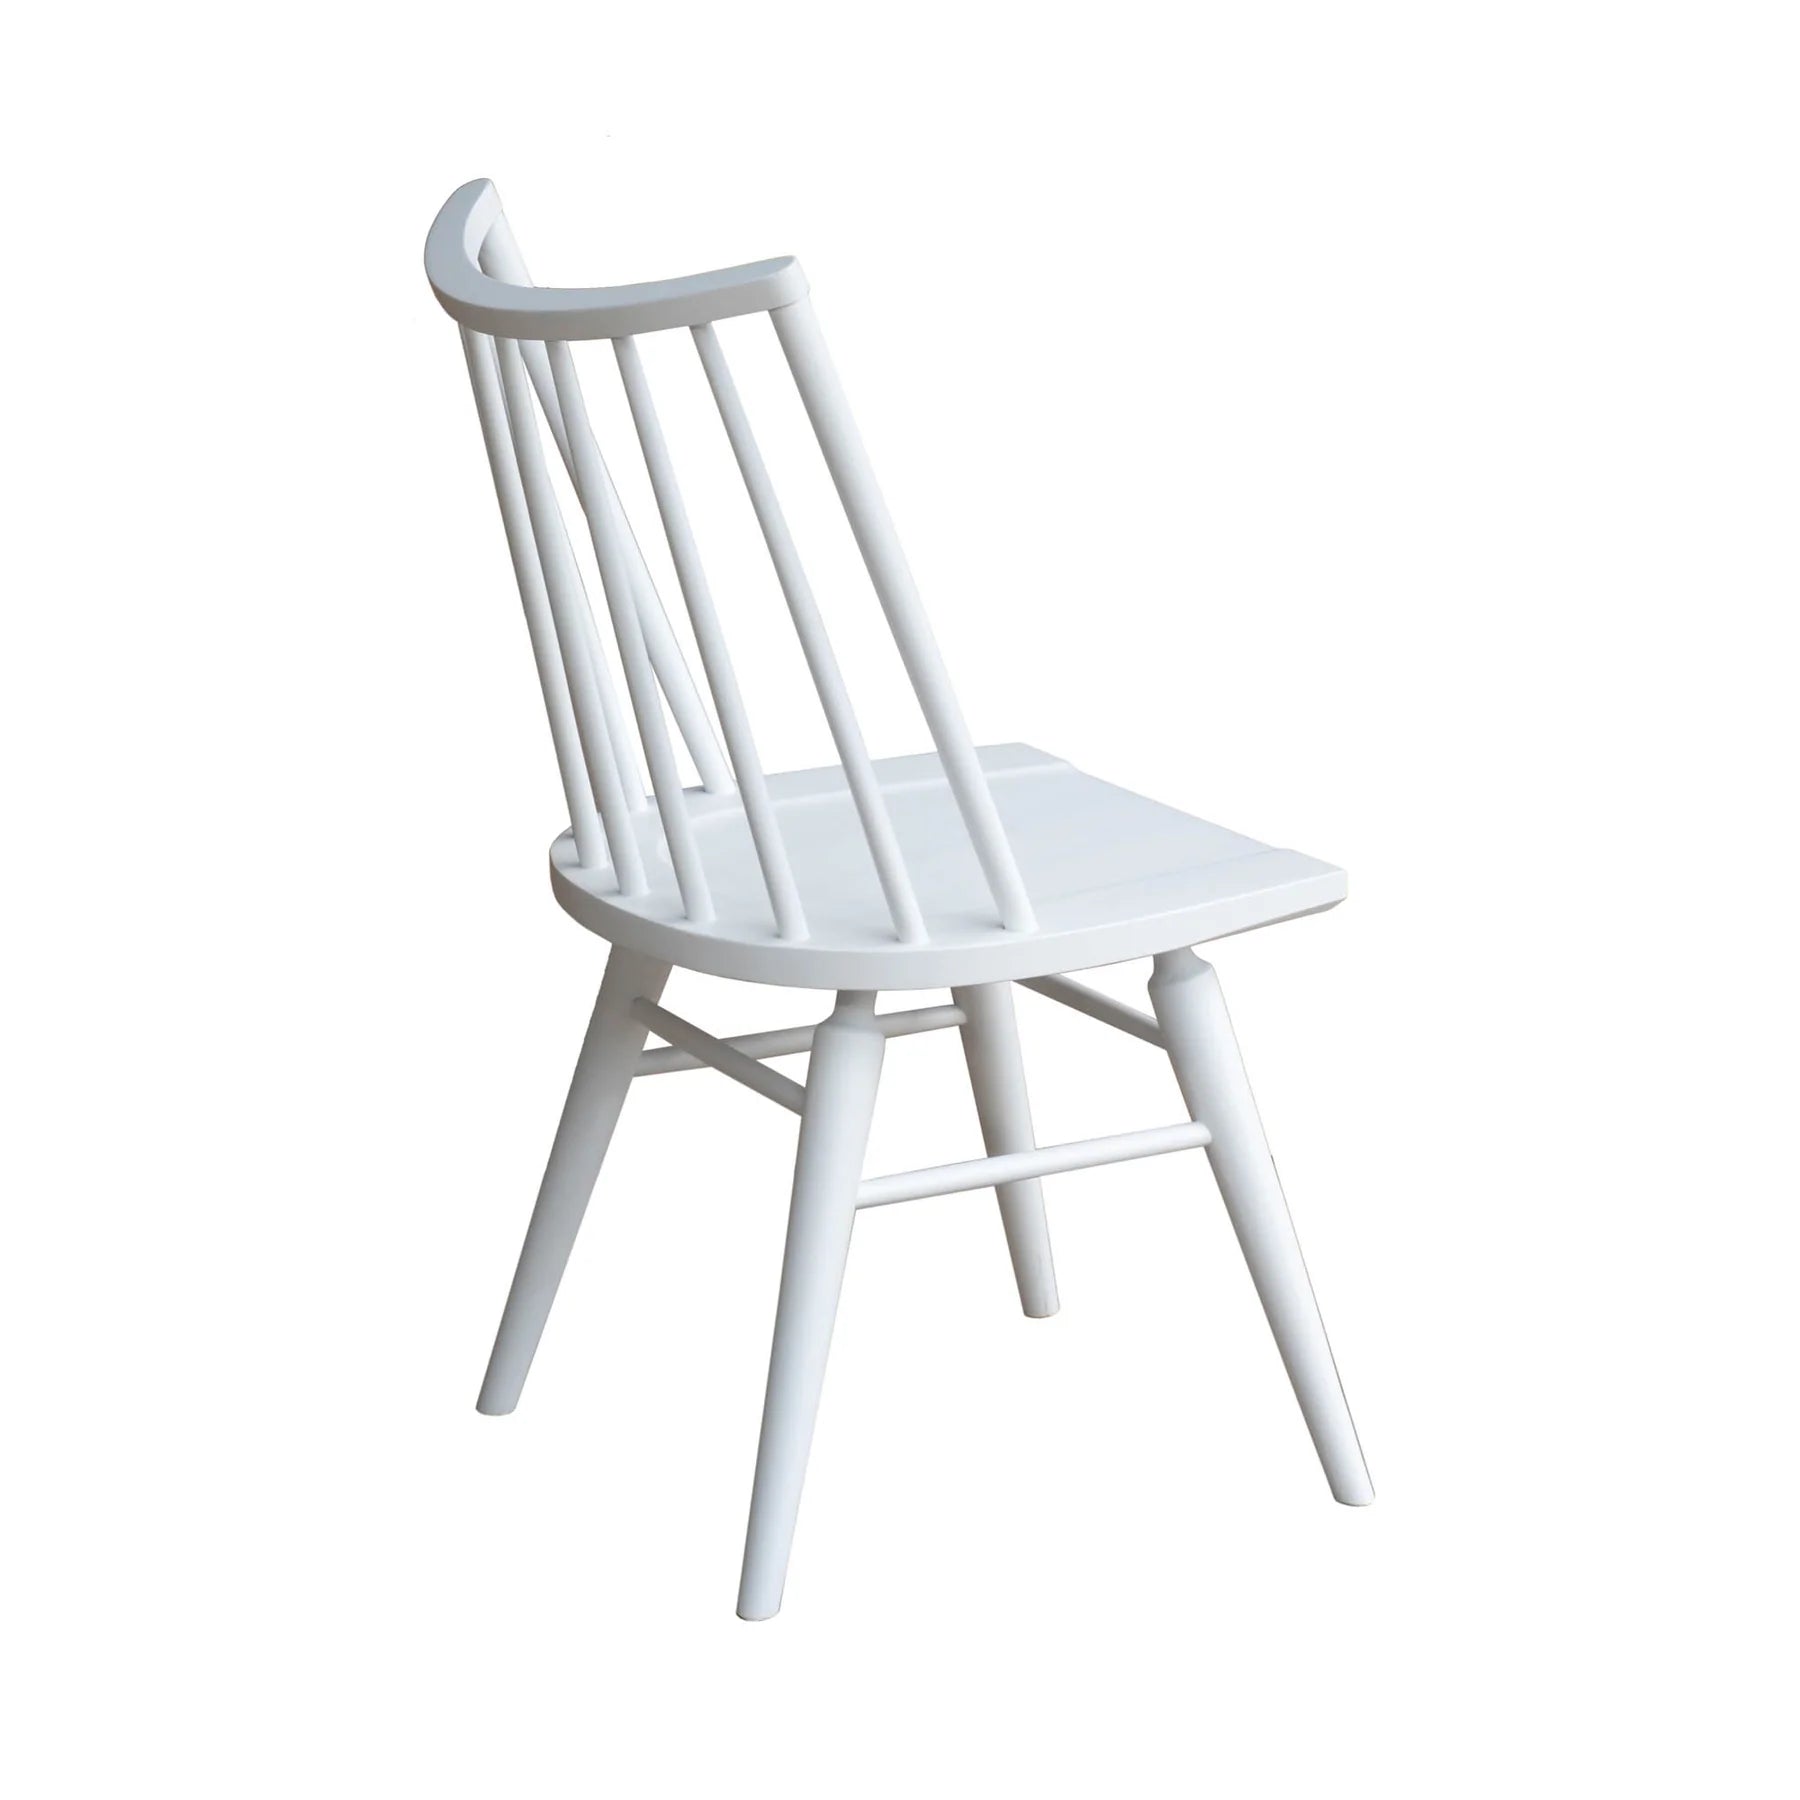 Weston Dining Chair- Natural, black or white